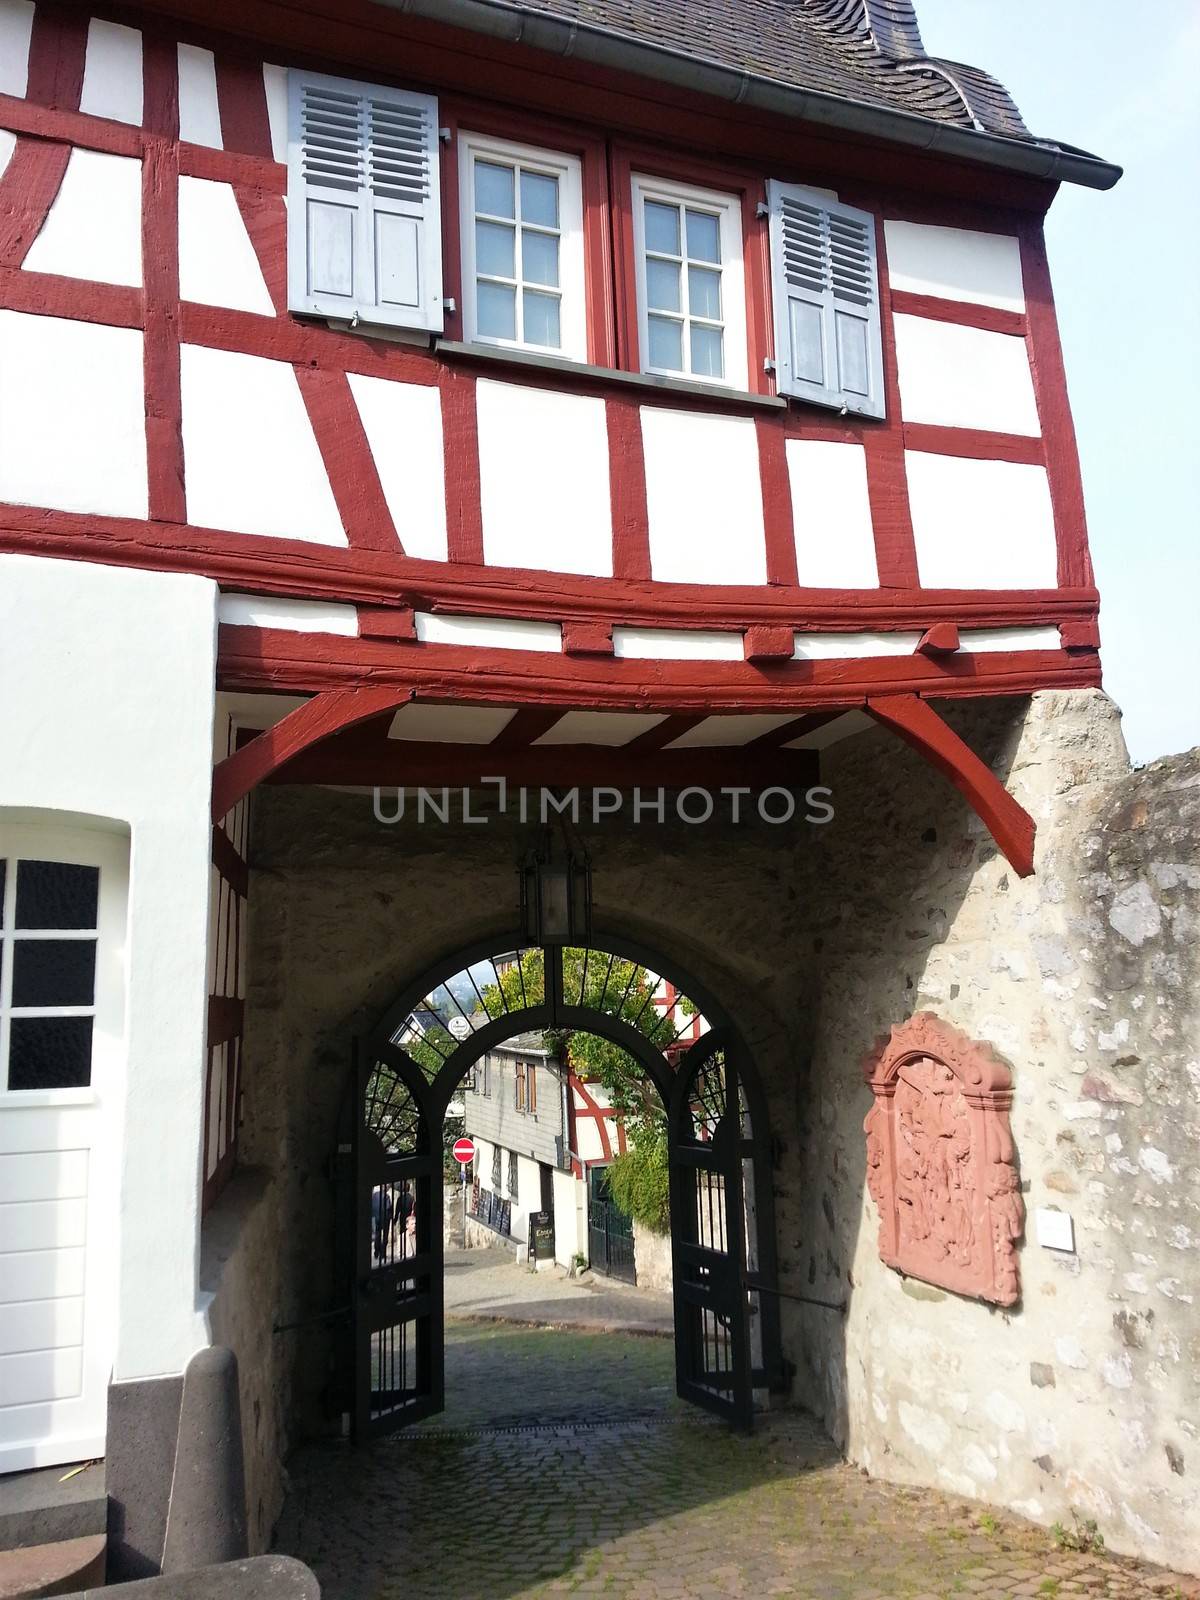 Half timbered house in Limburg, Germany with road and gate